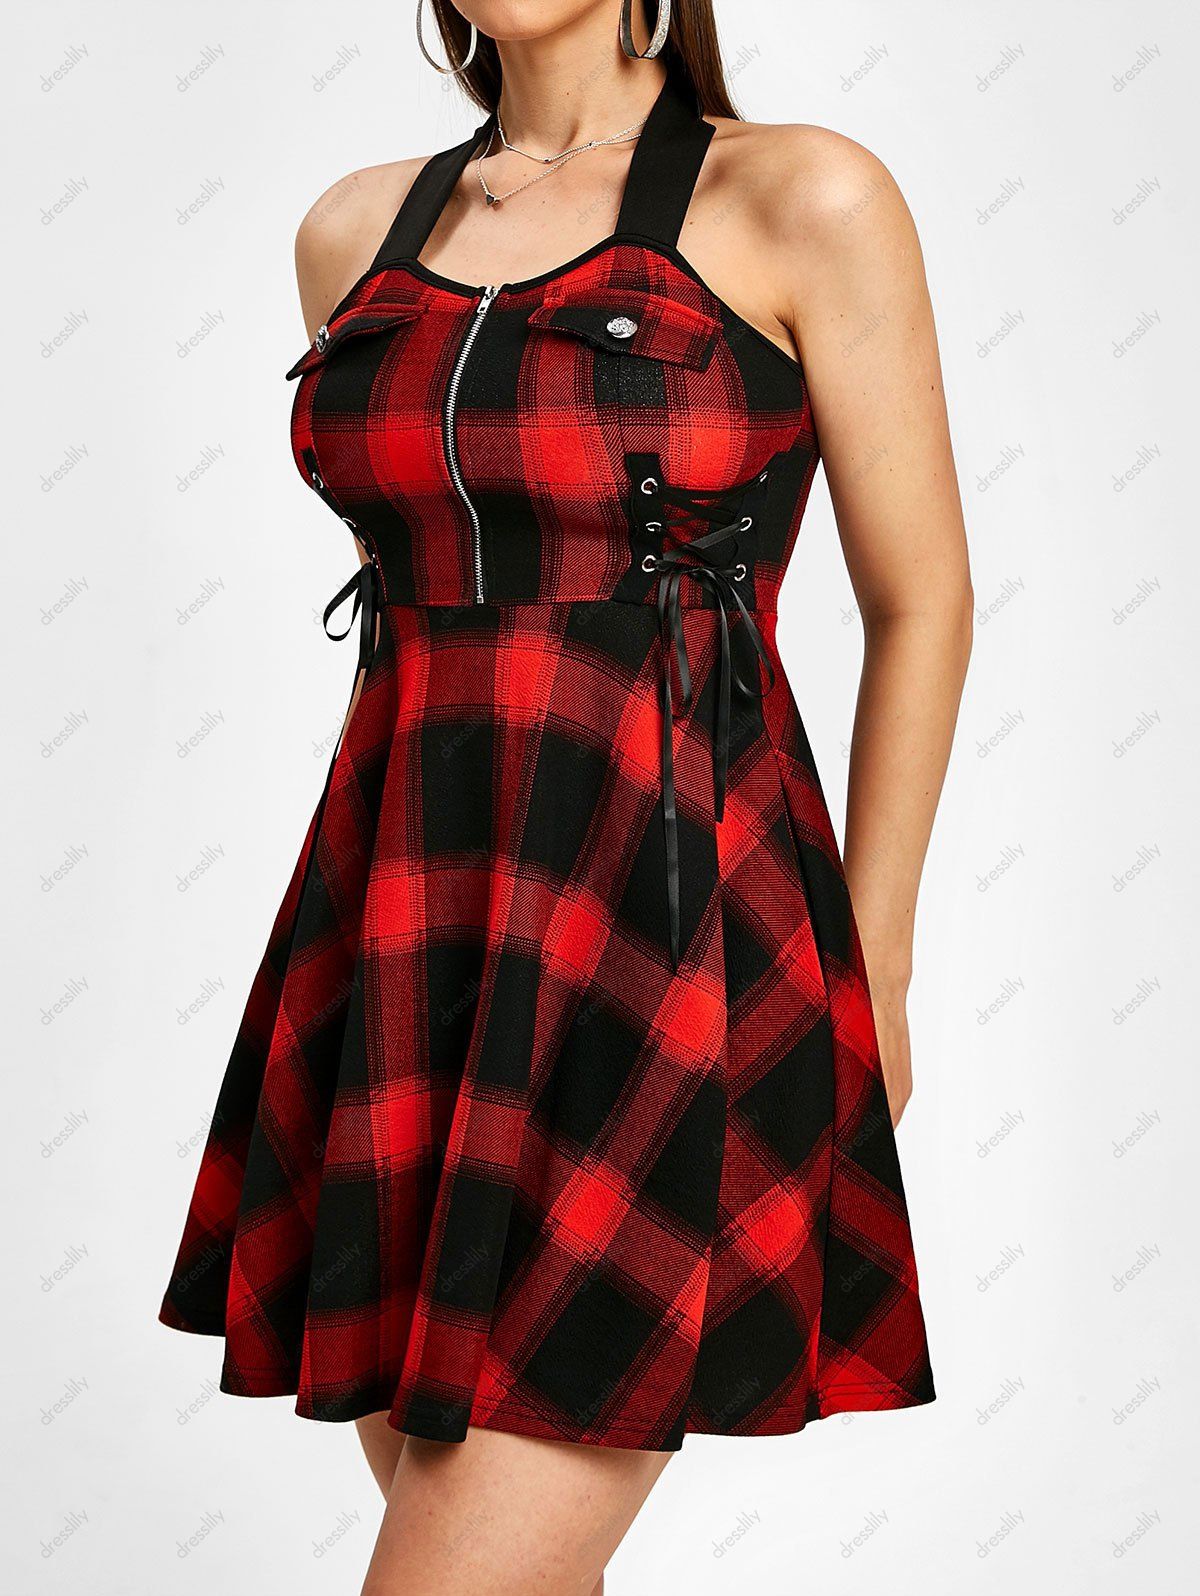 Vintage Plaid Checked Lace Up Corset Style Zip Flare Dress 